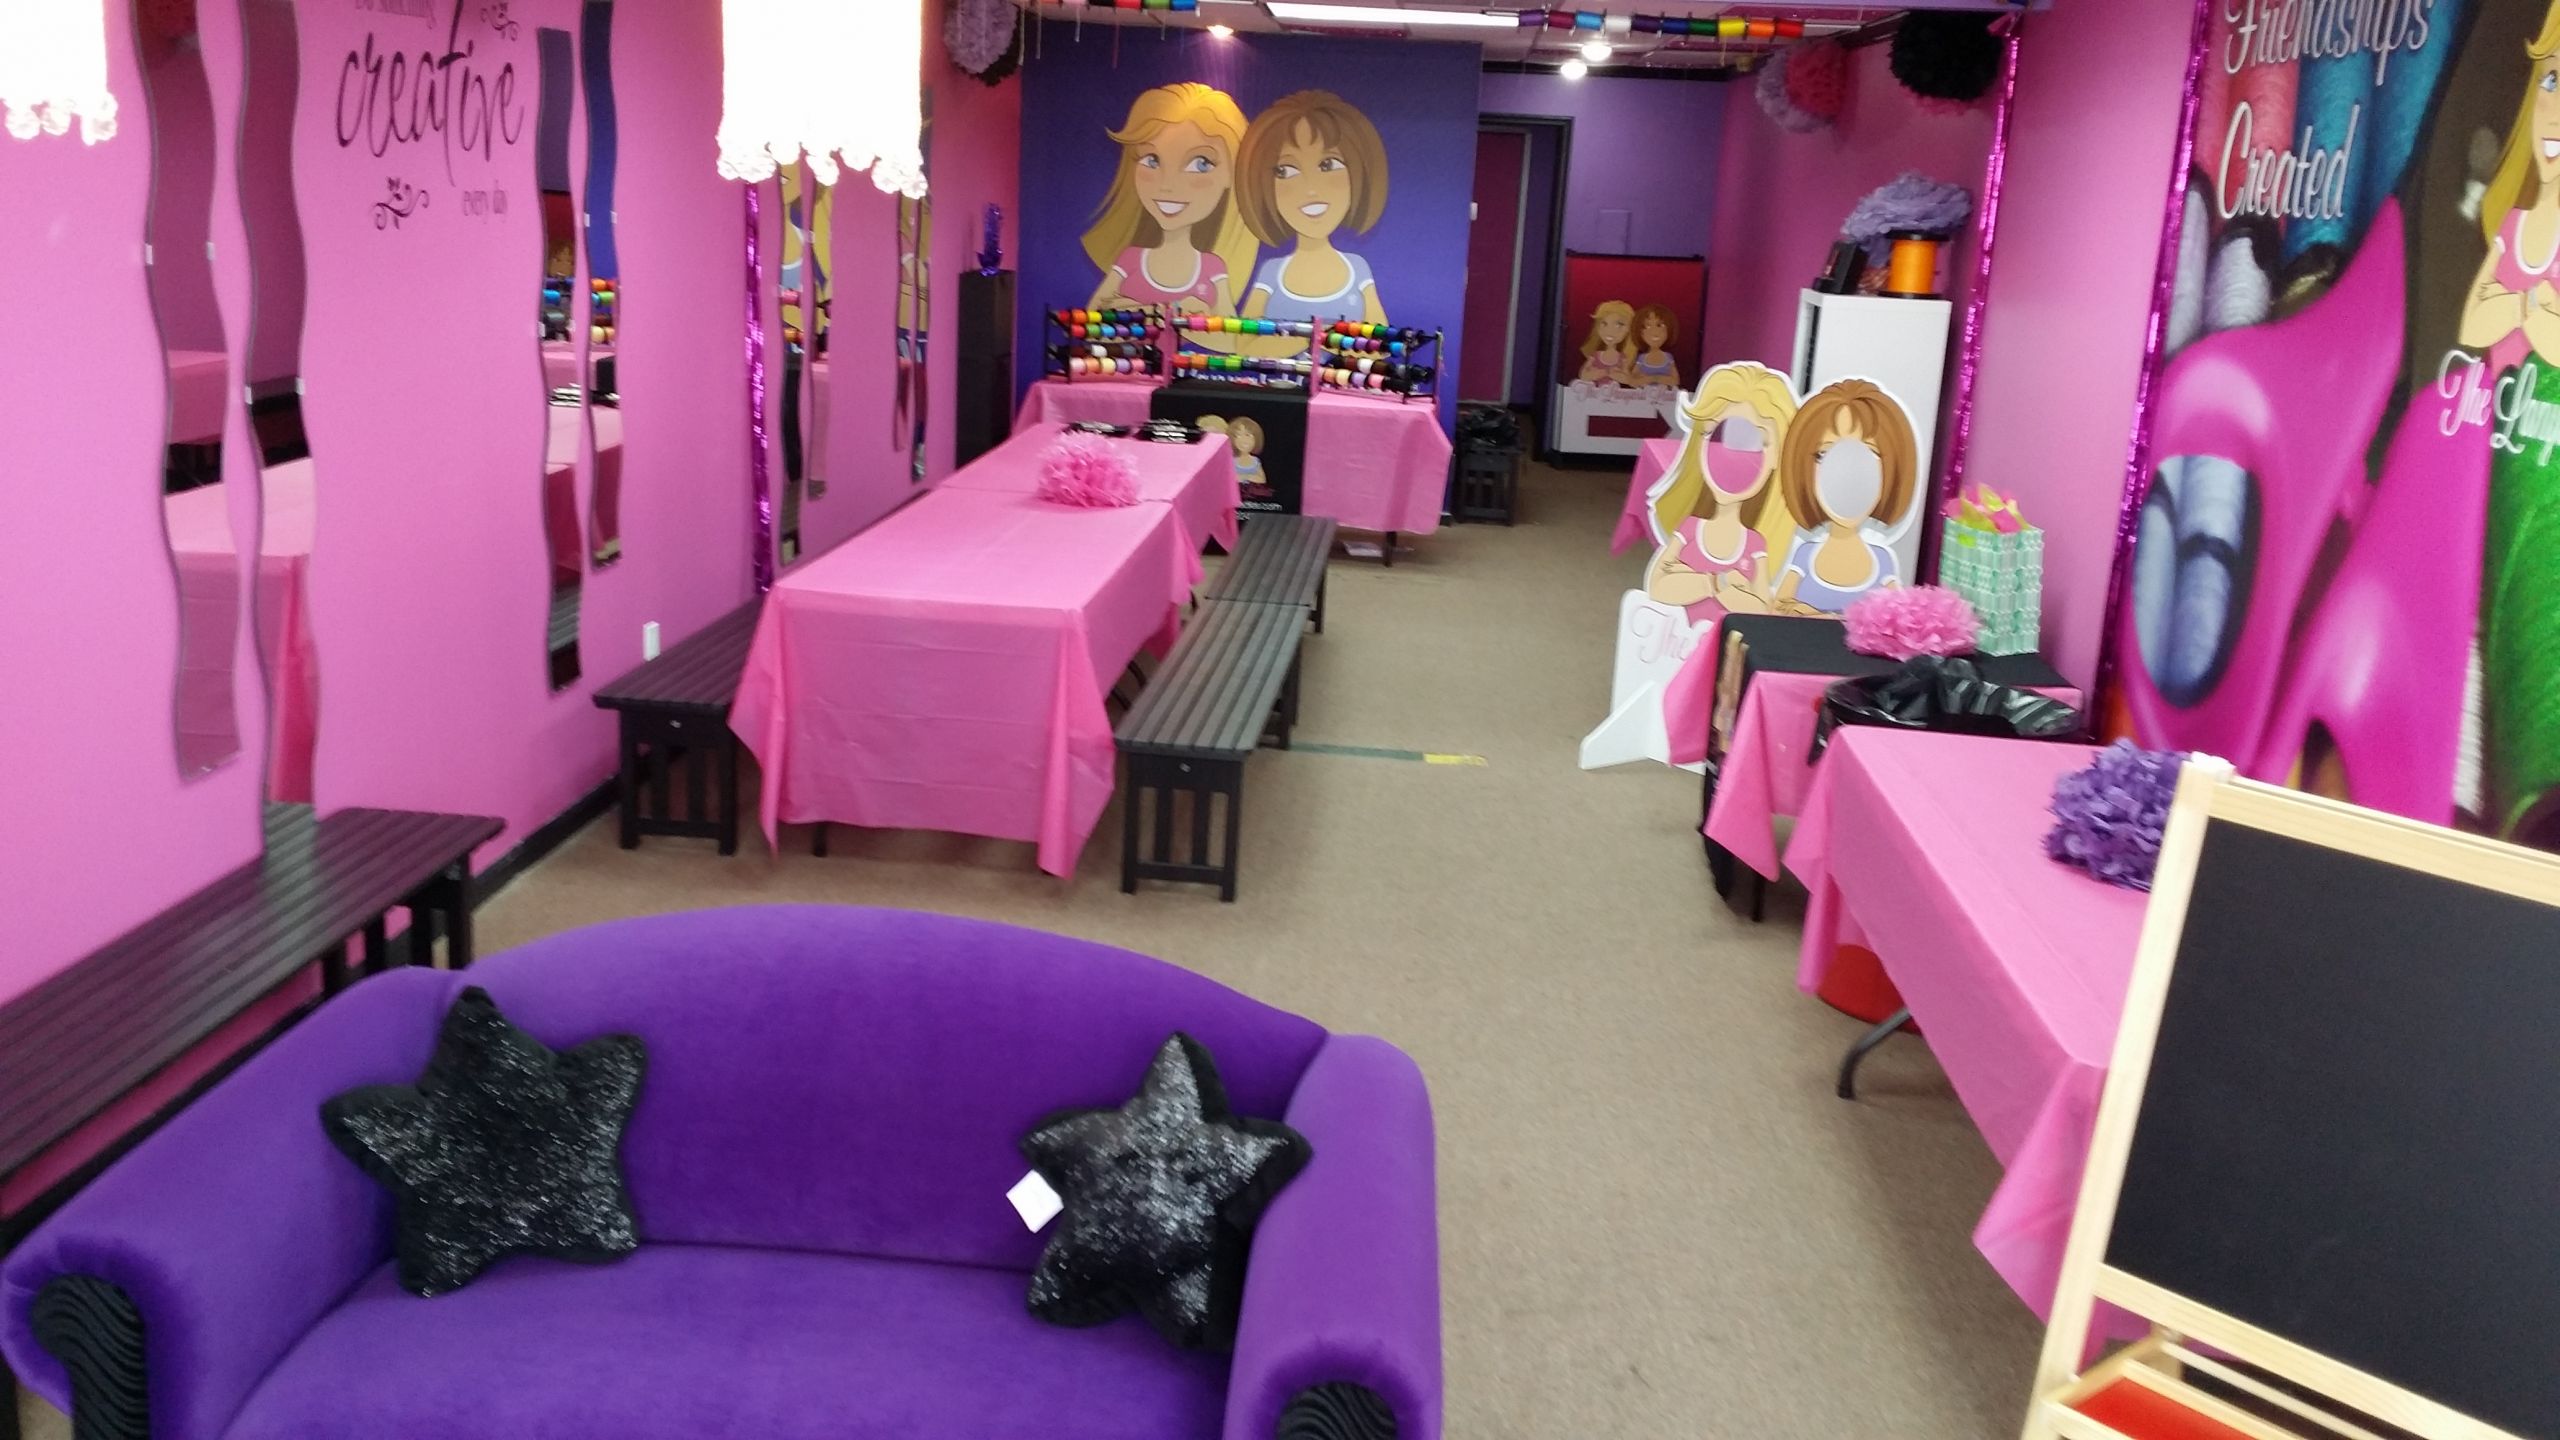 Fashion Classes For Kids
 Jewelry Making & Fashion Classes for Long Island Kids